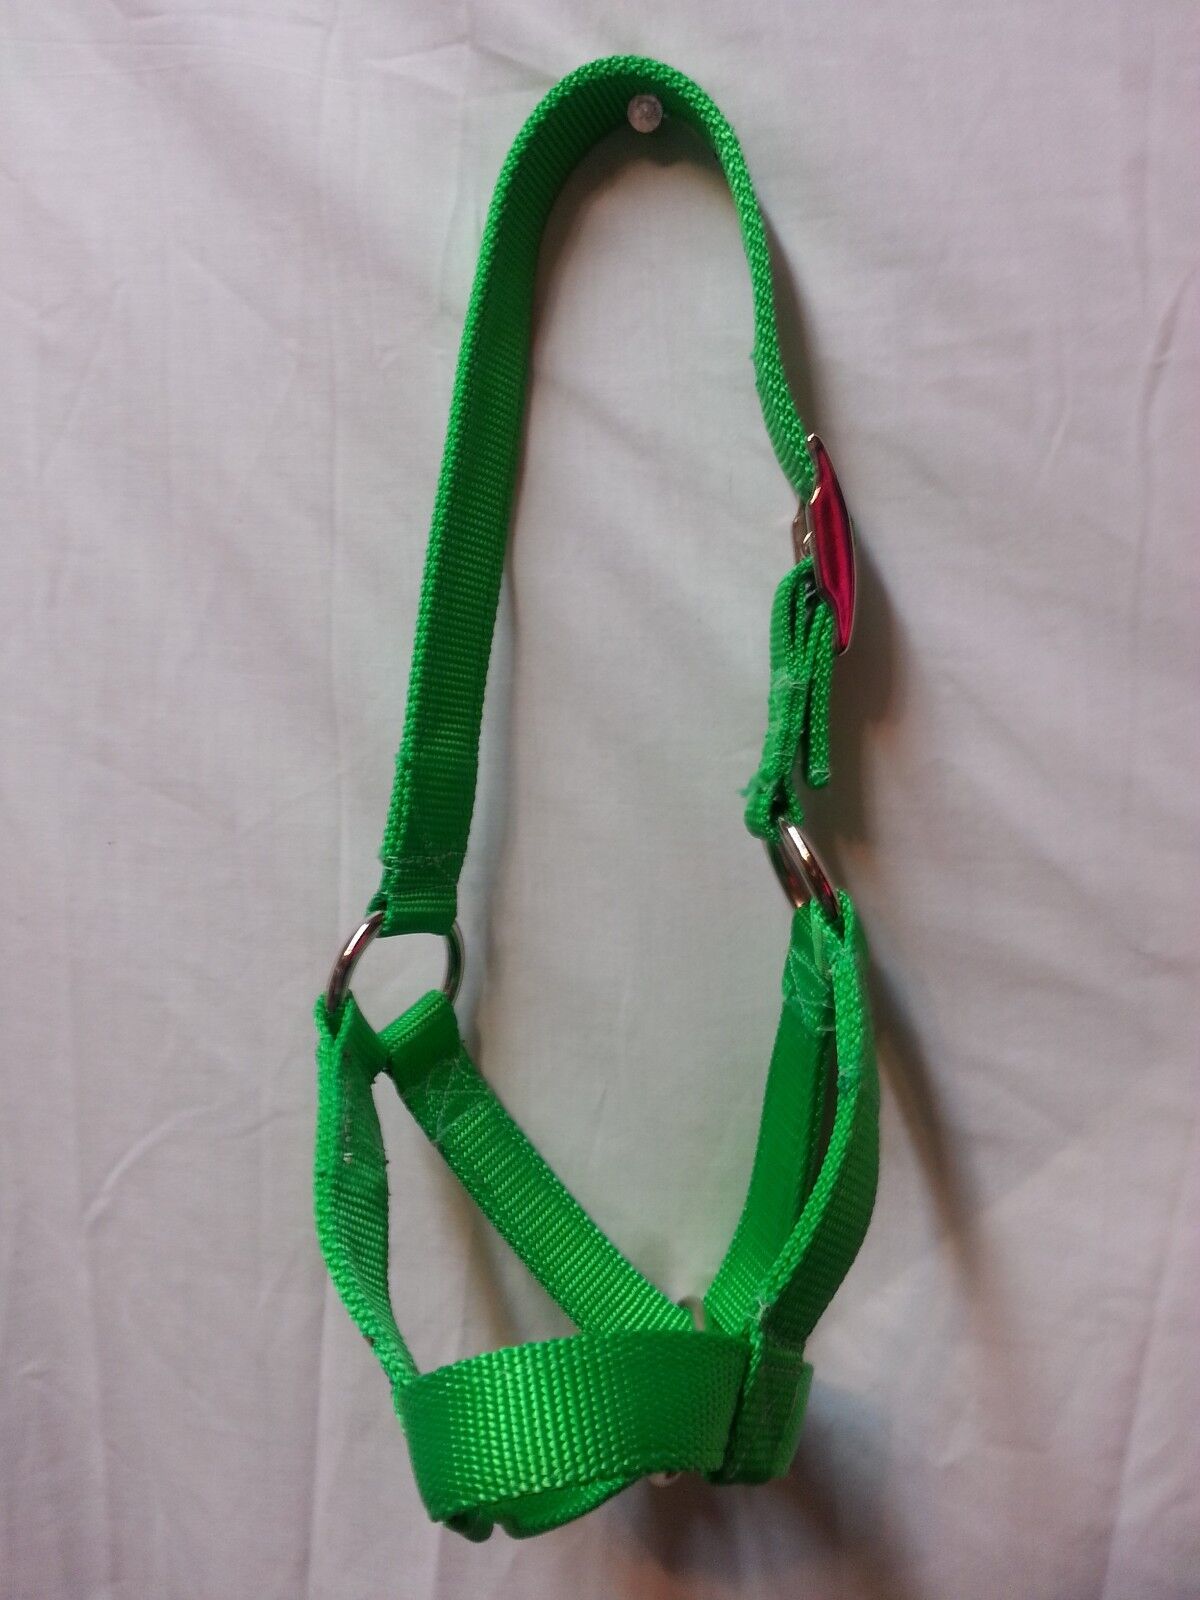 Cattle Halters Bull, Cow, Yearling, Calf, Newborn  Nylon Halter USA Made hand made Does not apply